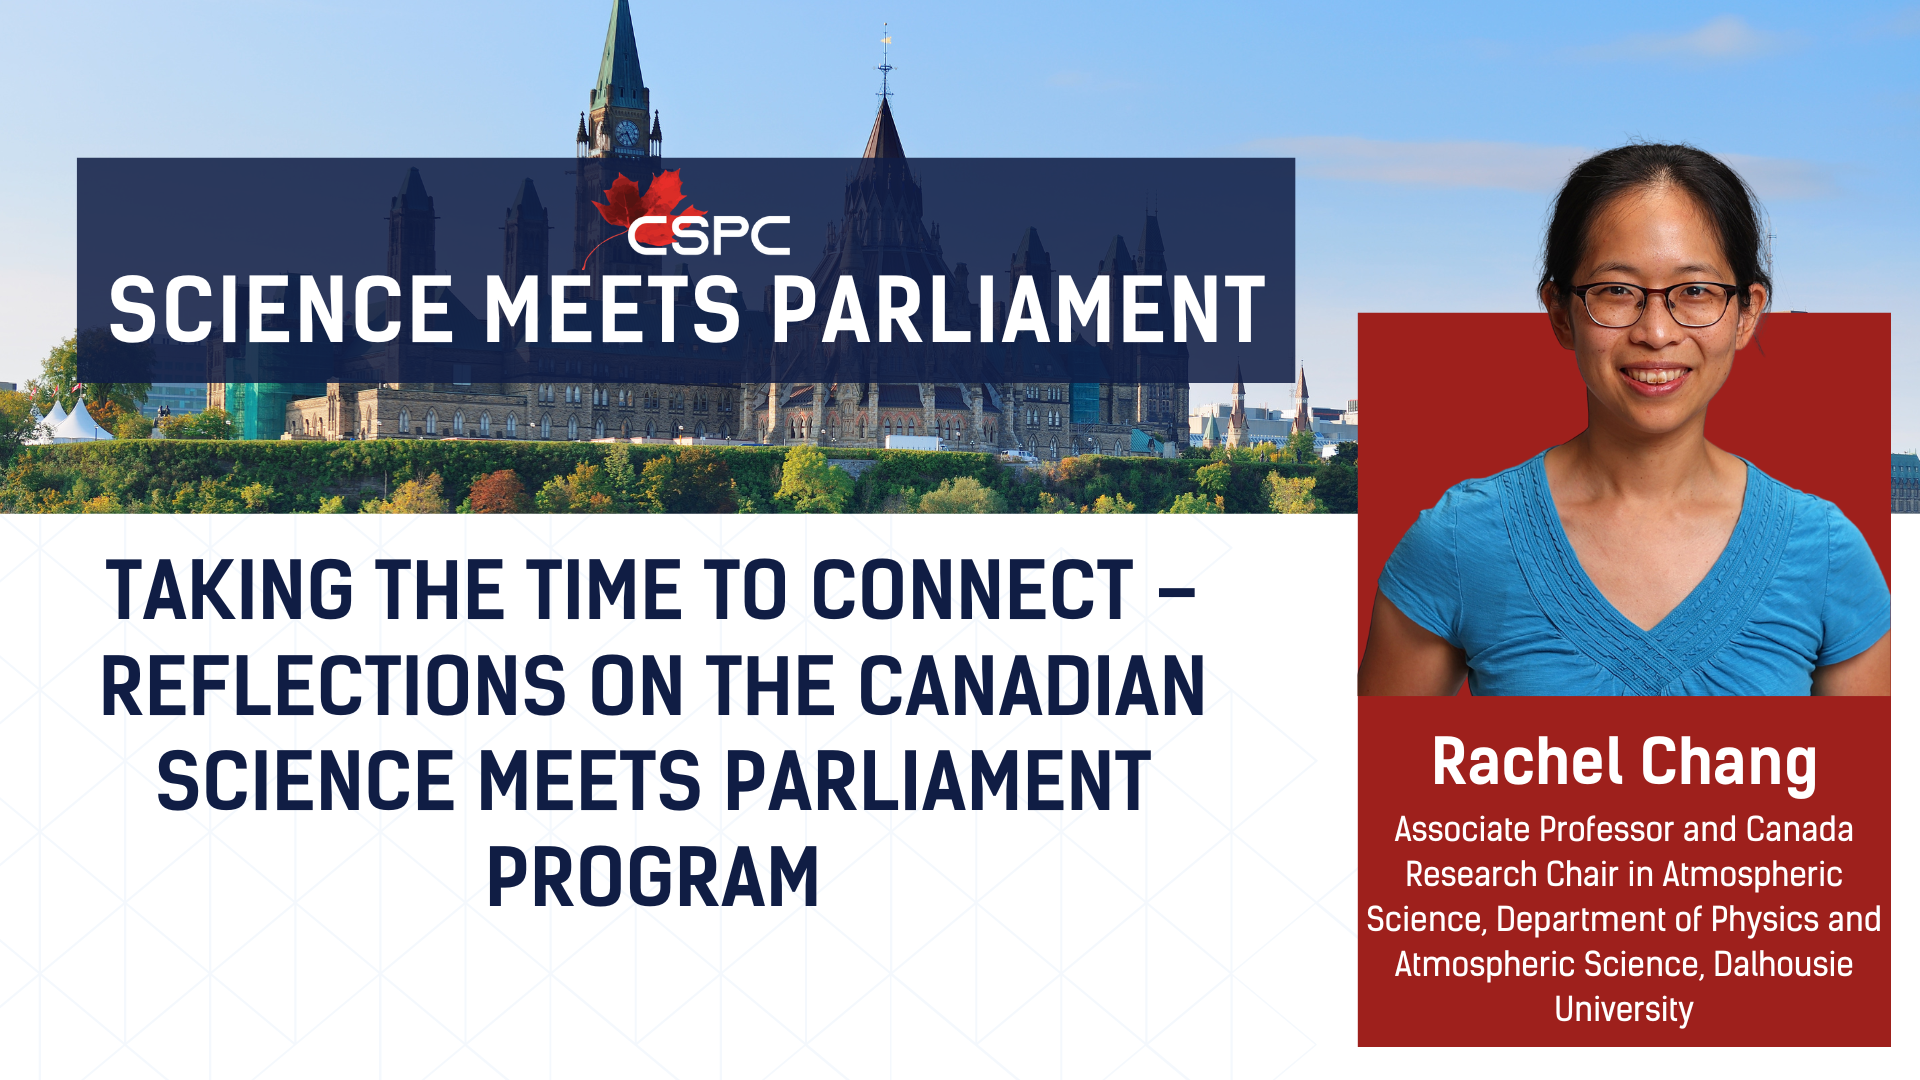 a banner with the title "Taking the time to connect – reflections on the Canadian Science Meets Parliament program" alongside a headshot of an asian woman with glasses